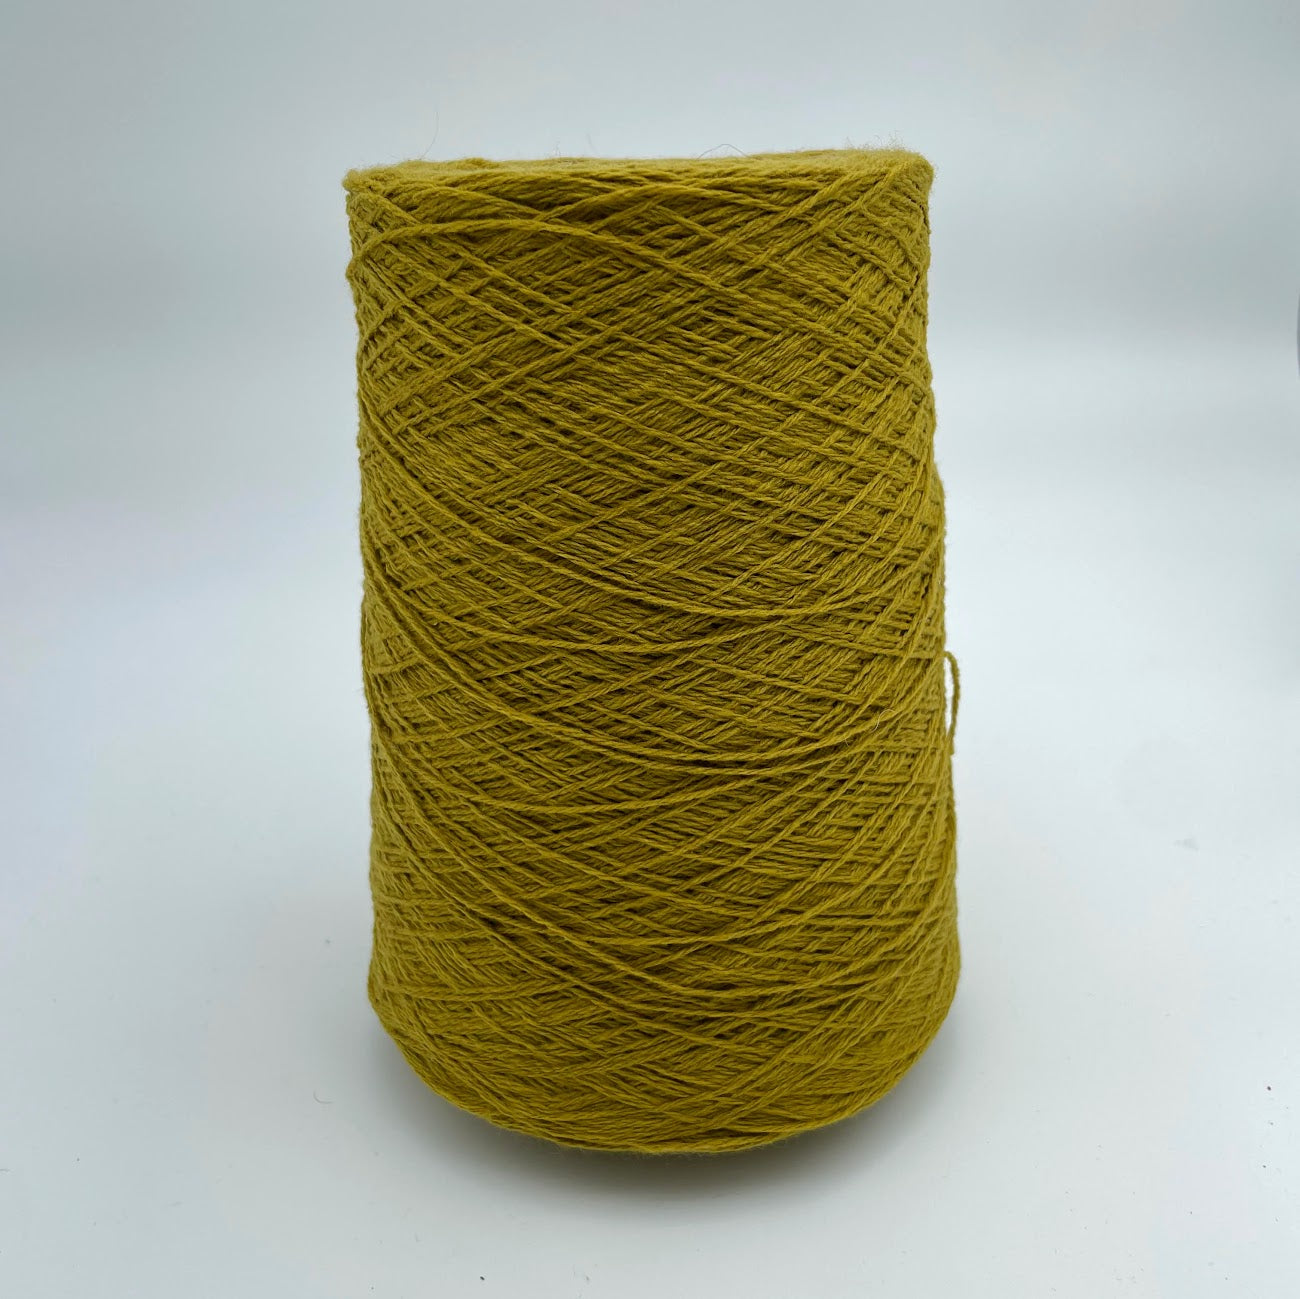 100% Cashmere Yarn - Deadstock Yarn - Made in Italy -  Bright Green - Heavy Lace Weight  - 100g